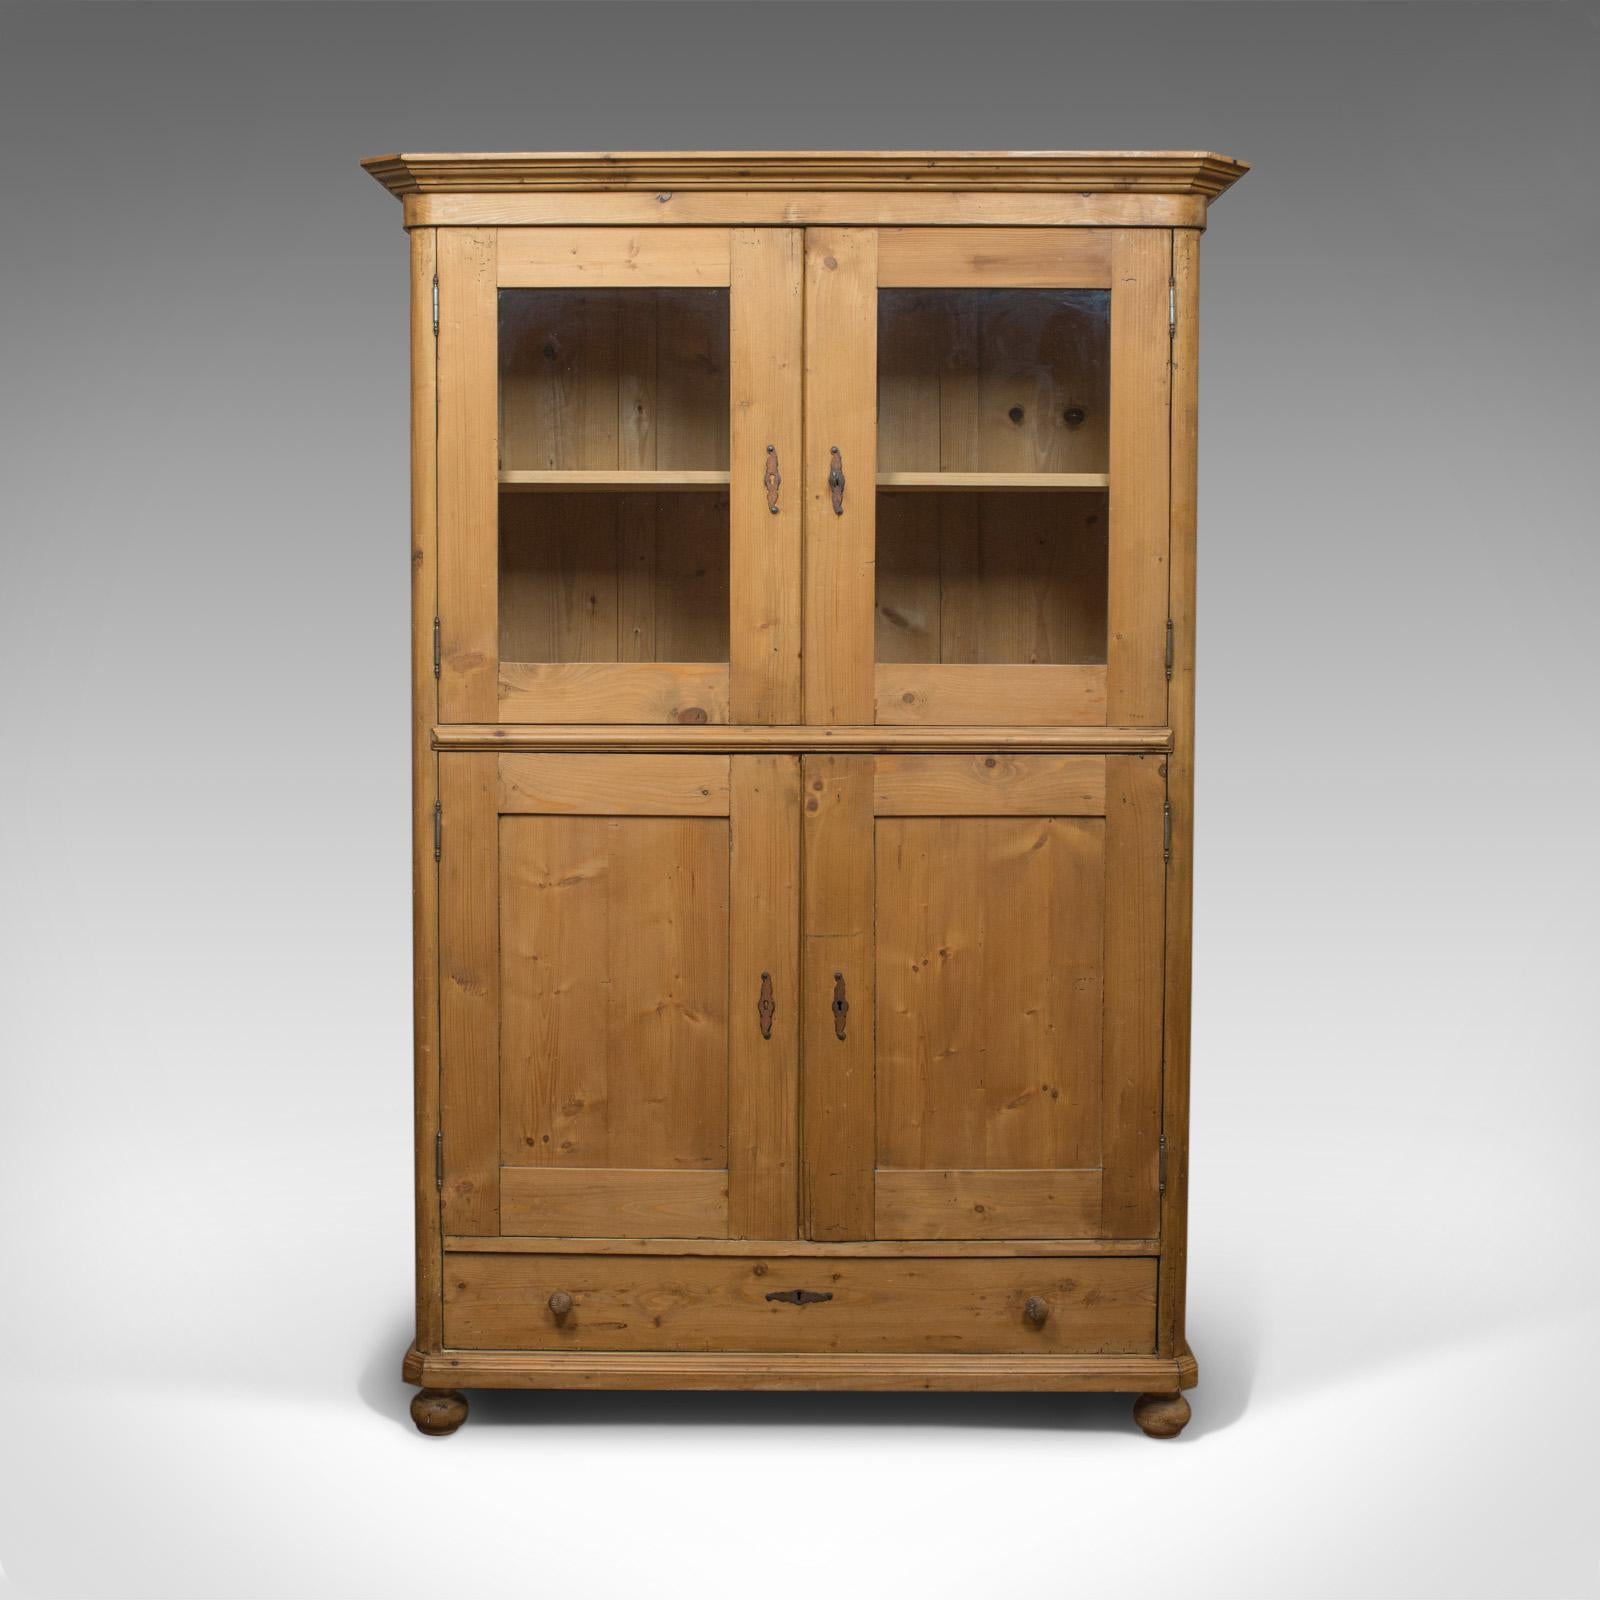 This is a vintage two-door bookcase cabinet. A French, pine cupboard dating to the mid-20th century, circa 1960.

Select pine displays rich biscuit hues and fine grain interest
Good consistent color throughout and a desirable aged patina
Deep